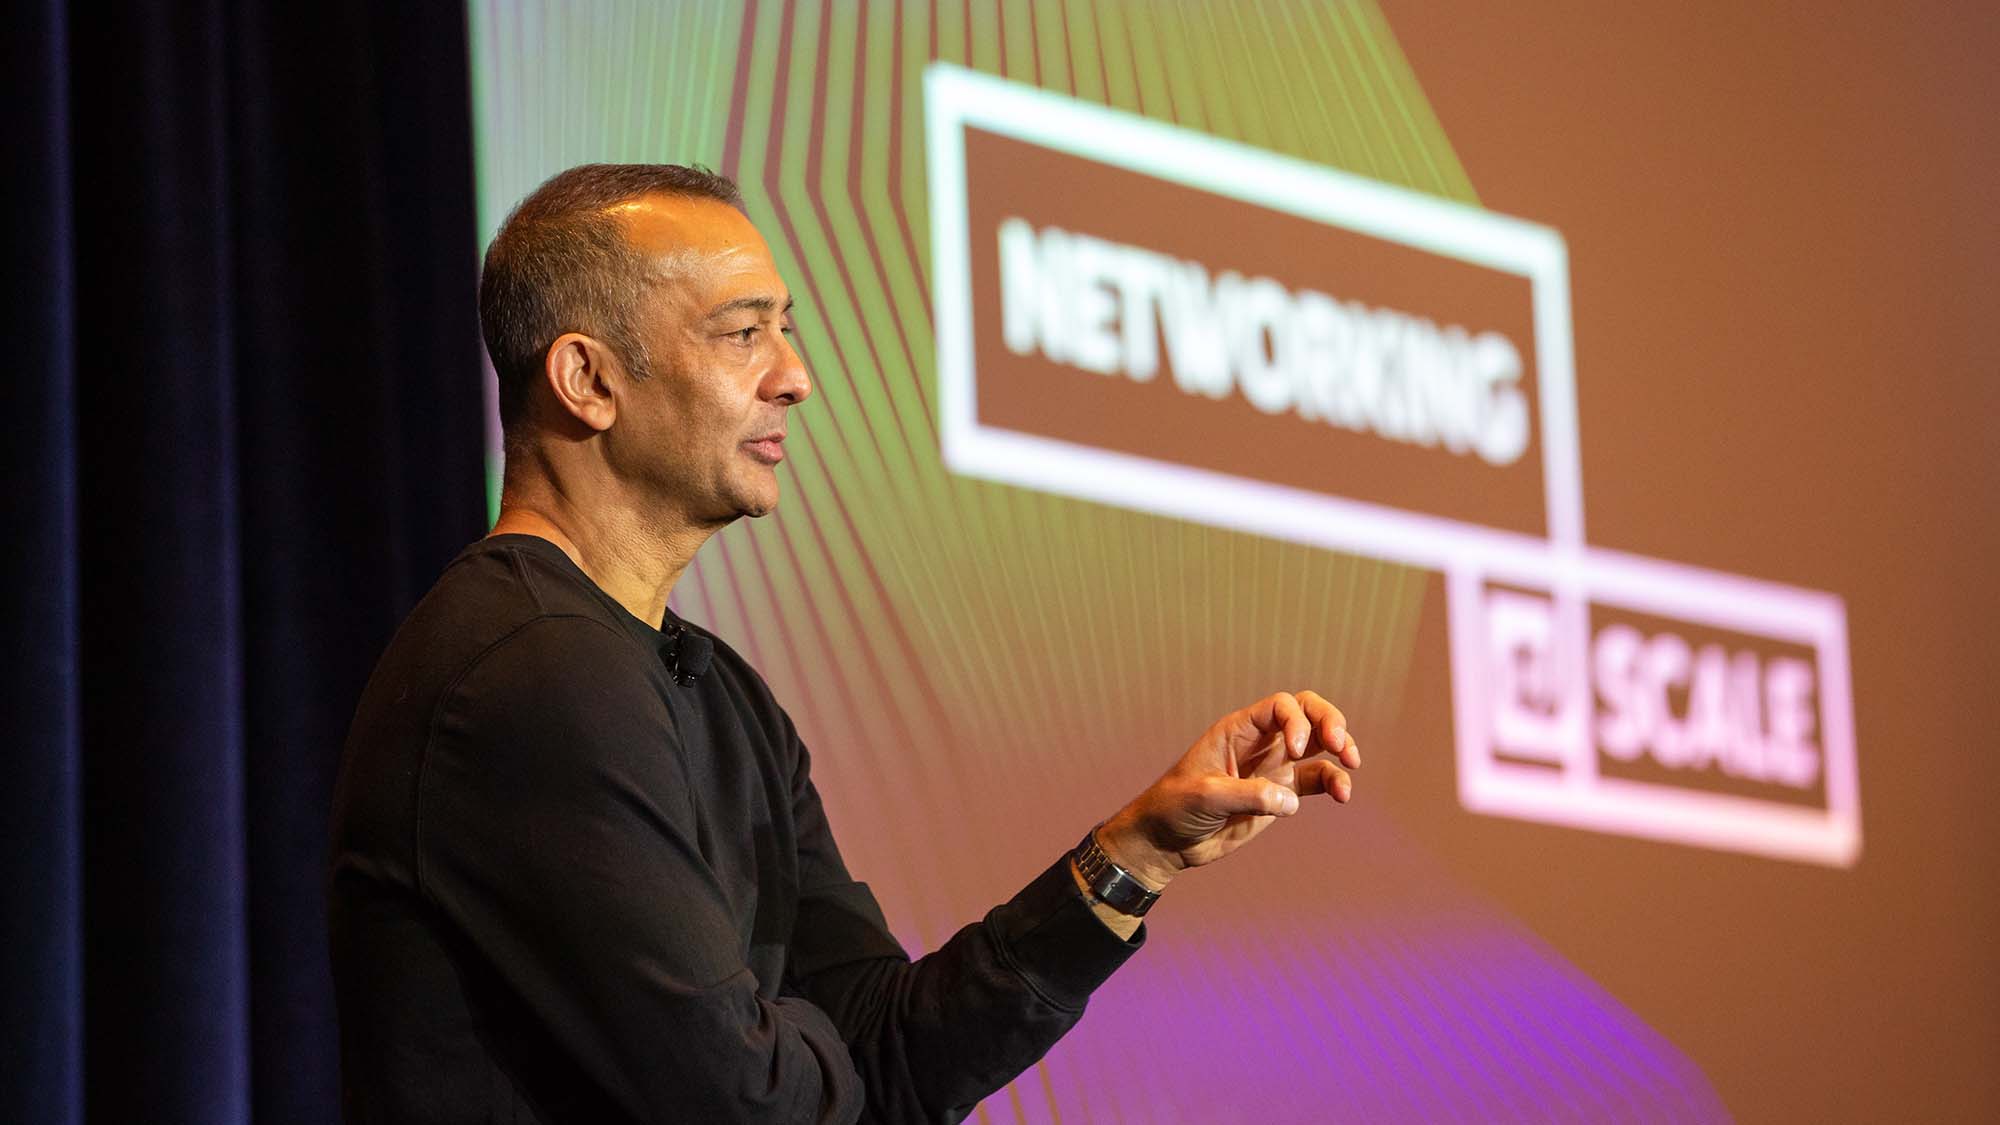 Watch all the talks from Networking @Scale 2019 in Boston, including a keynote by Najam Ahmad of Facebook.